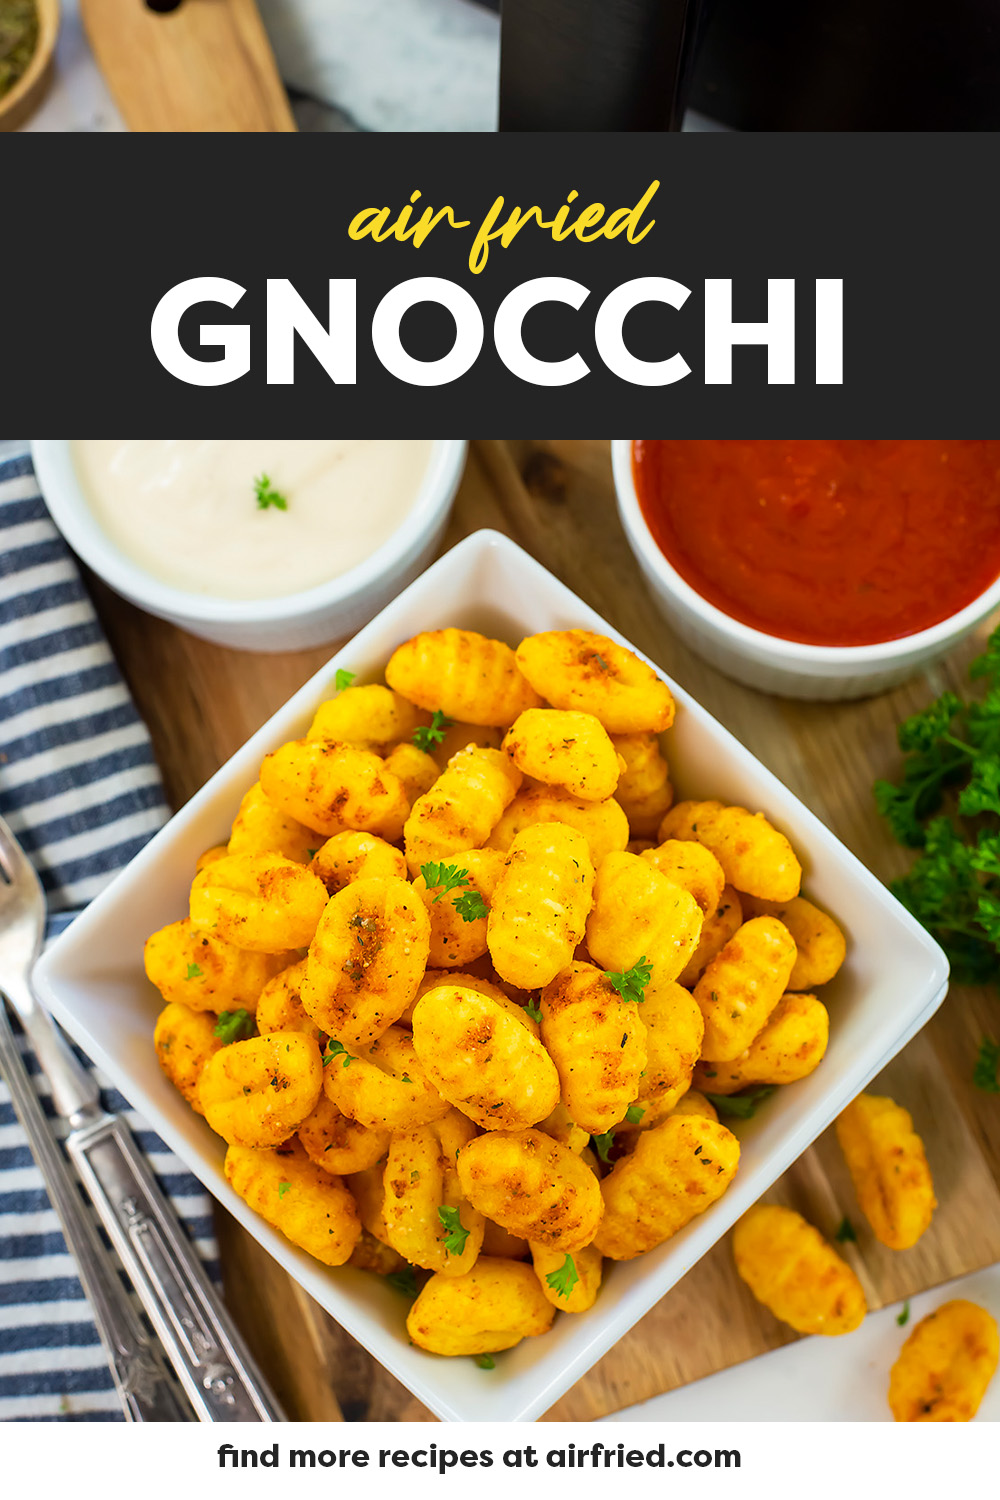 Air fryer gnocchi has a crisp skin and a wonderful fluffy center.  Add some alfredo dip for amazing taste and texture combined!